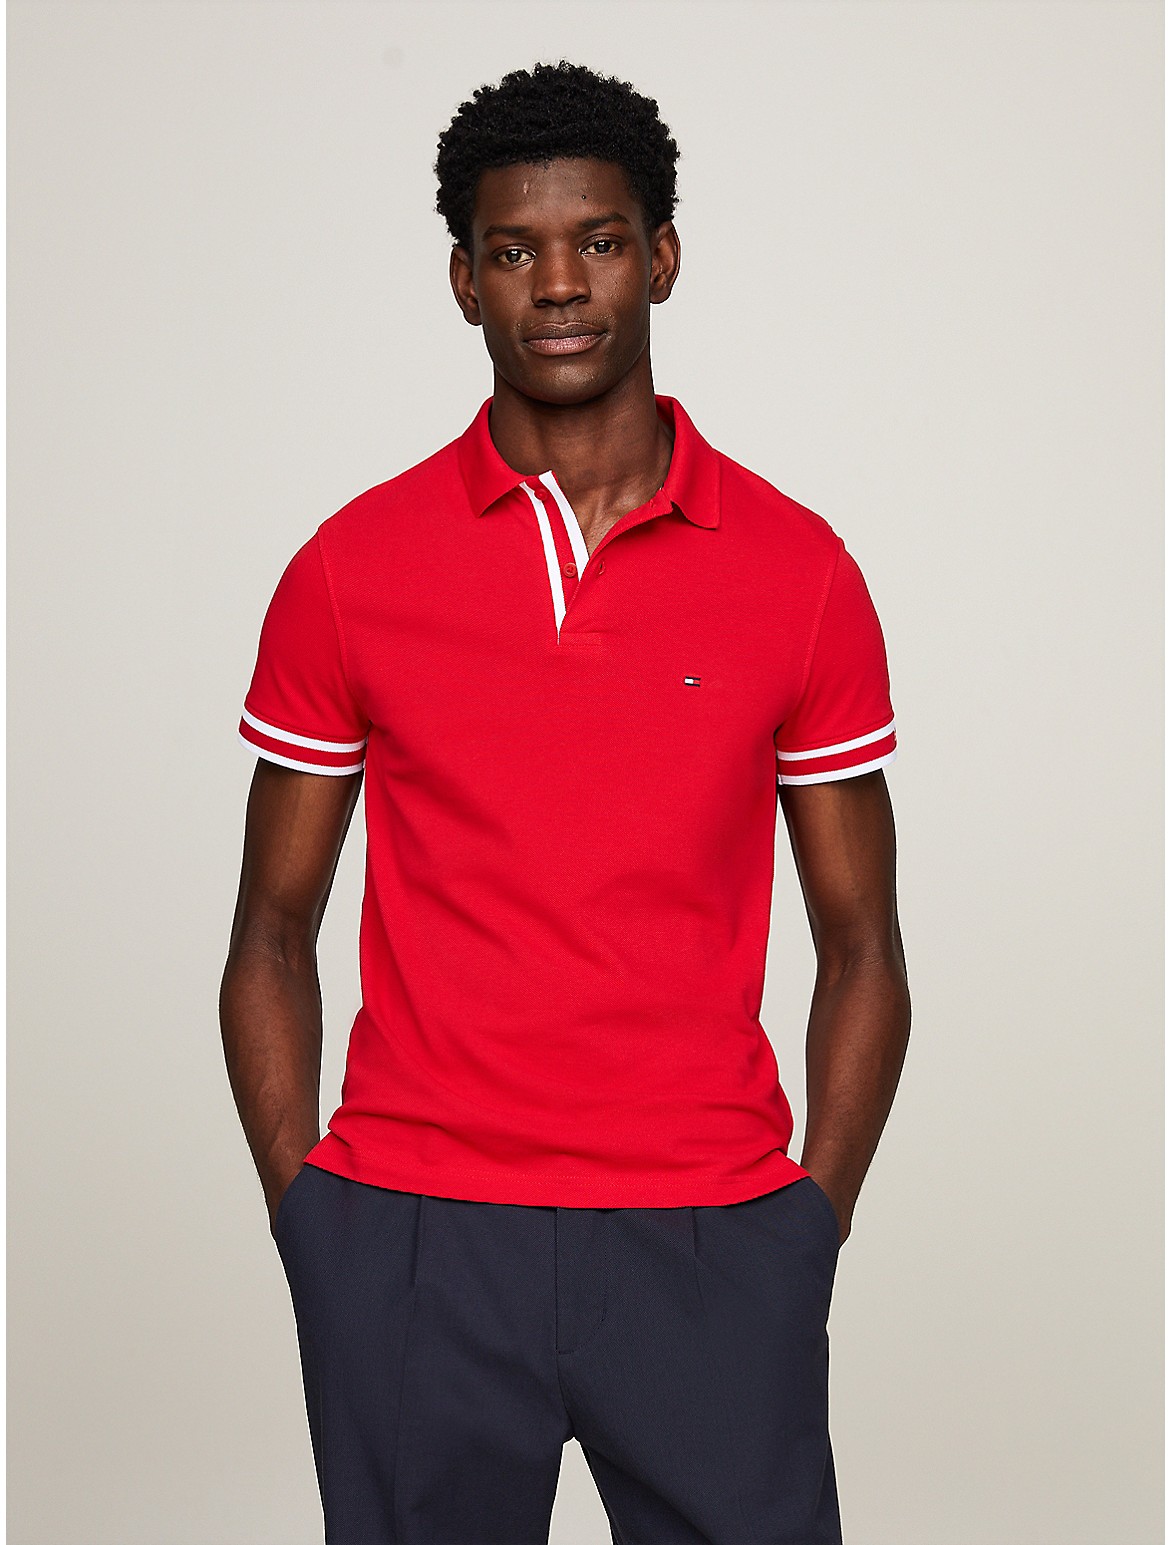 Tommy Hilfiger Men's Slim Fit Monotype Cuff Polo